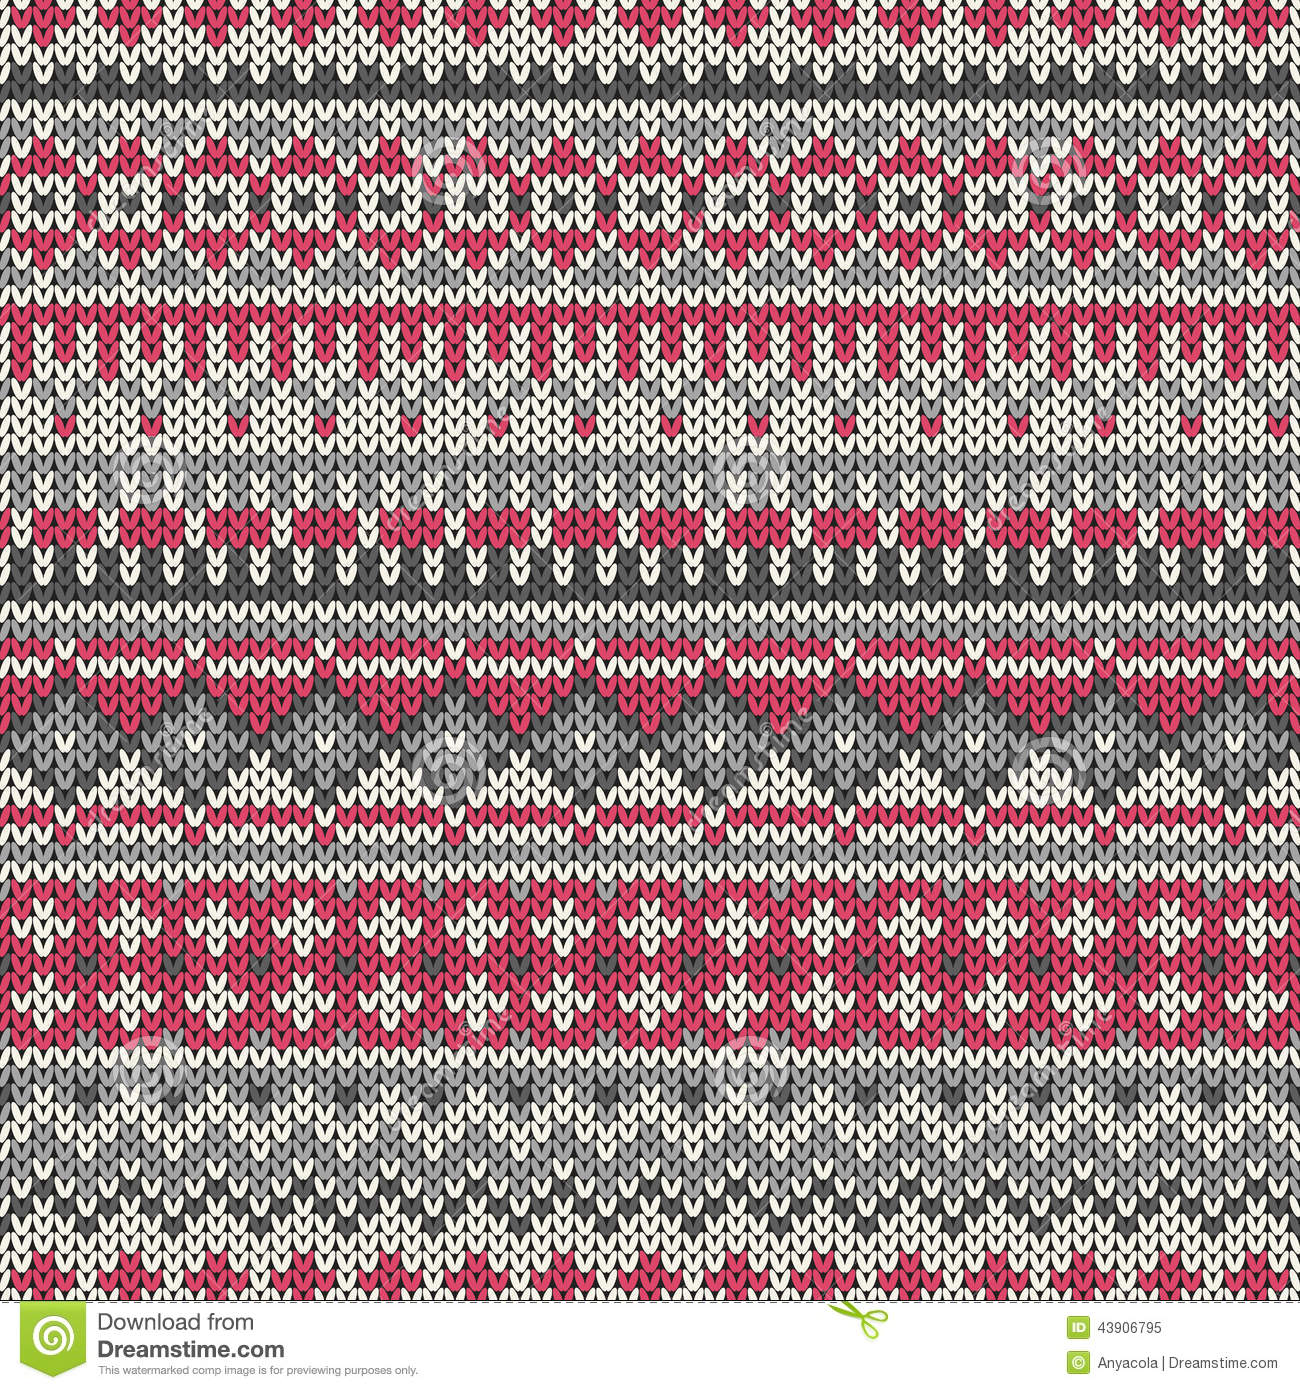 Fair Isle knitting patterns seamless knitted pattern in traditional fair isle style. eps available zmmjqvp